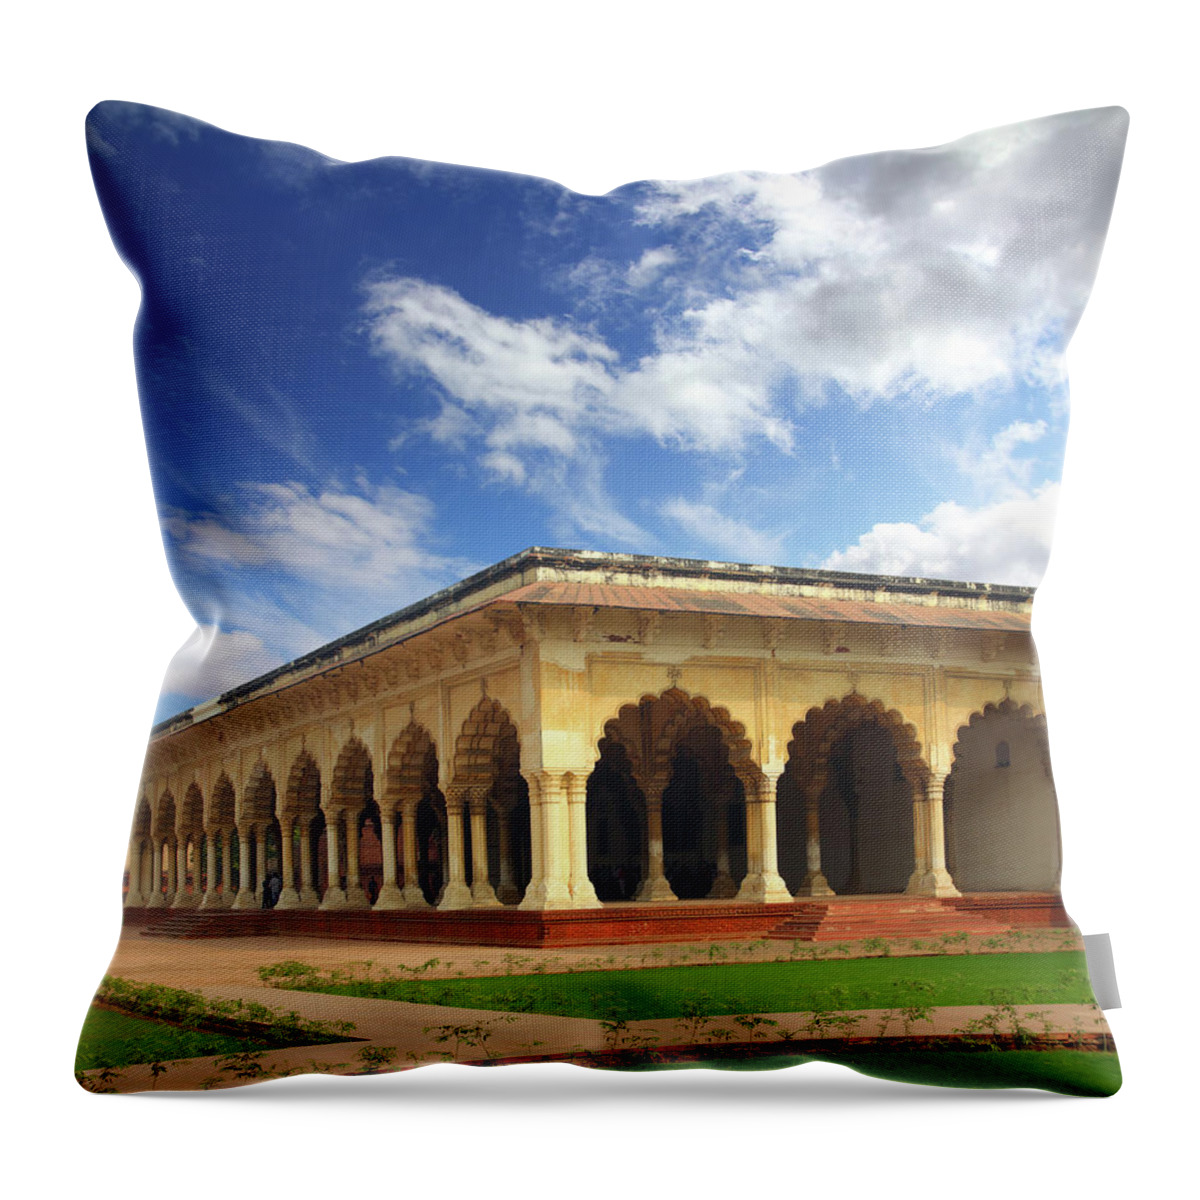 India Throw Pillow featuring the photograph Palace With Columns In Agra Fort by Mikhail Kokhanchikov